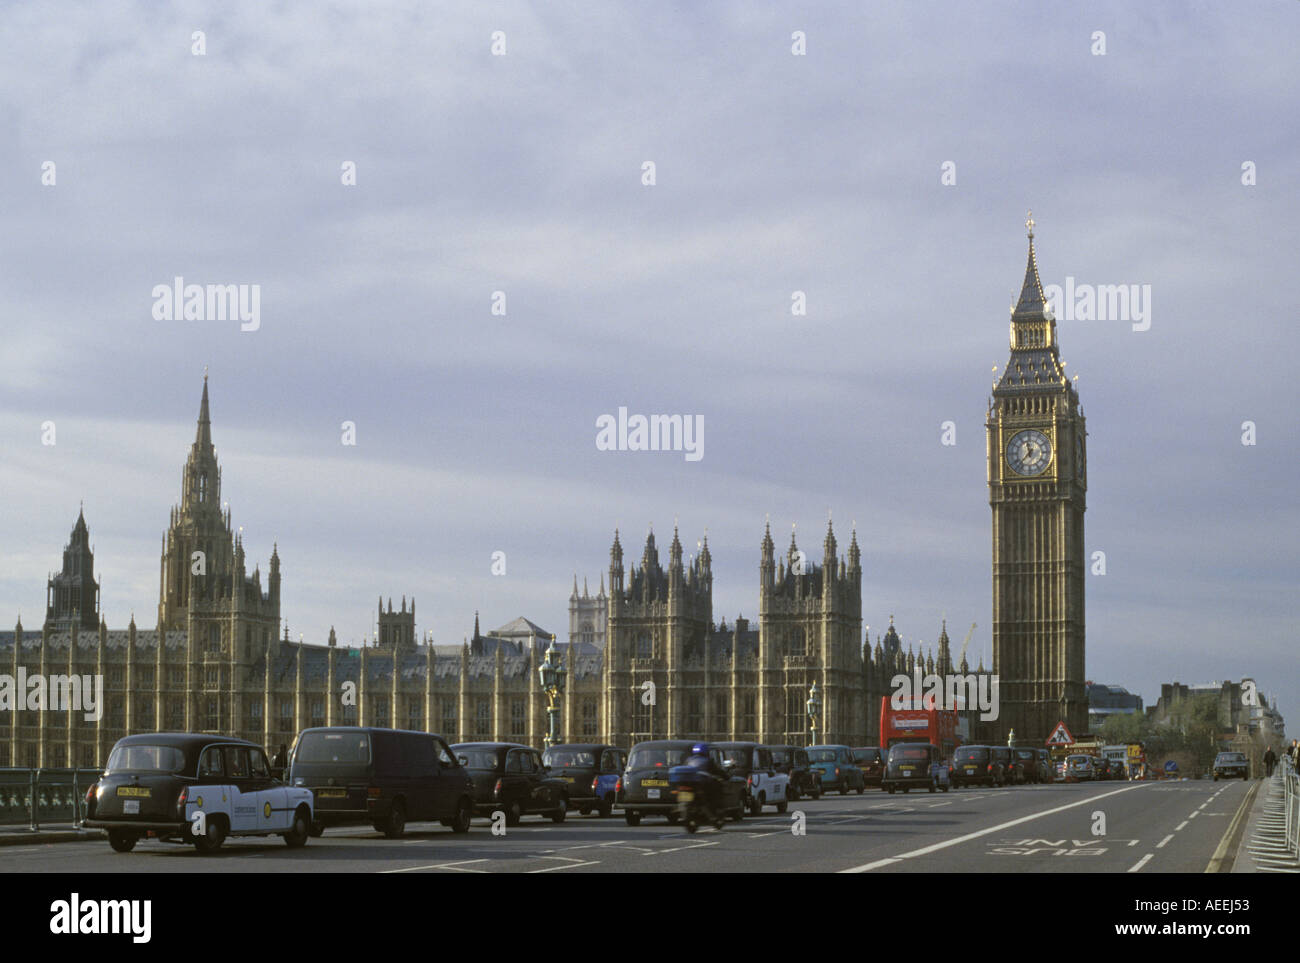 The Houses of Parliament in Westminster on the banks of the Thames River in London Stock Photo